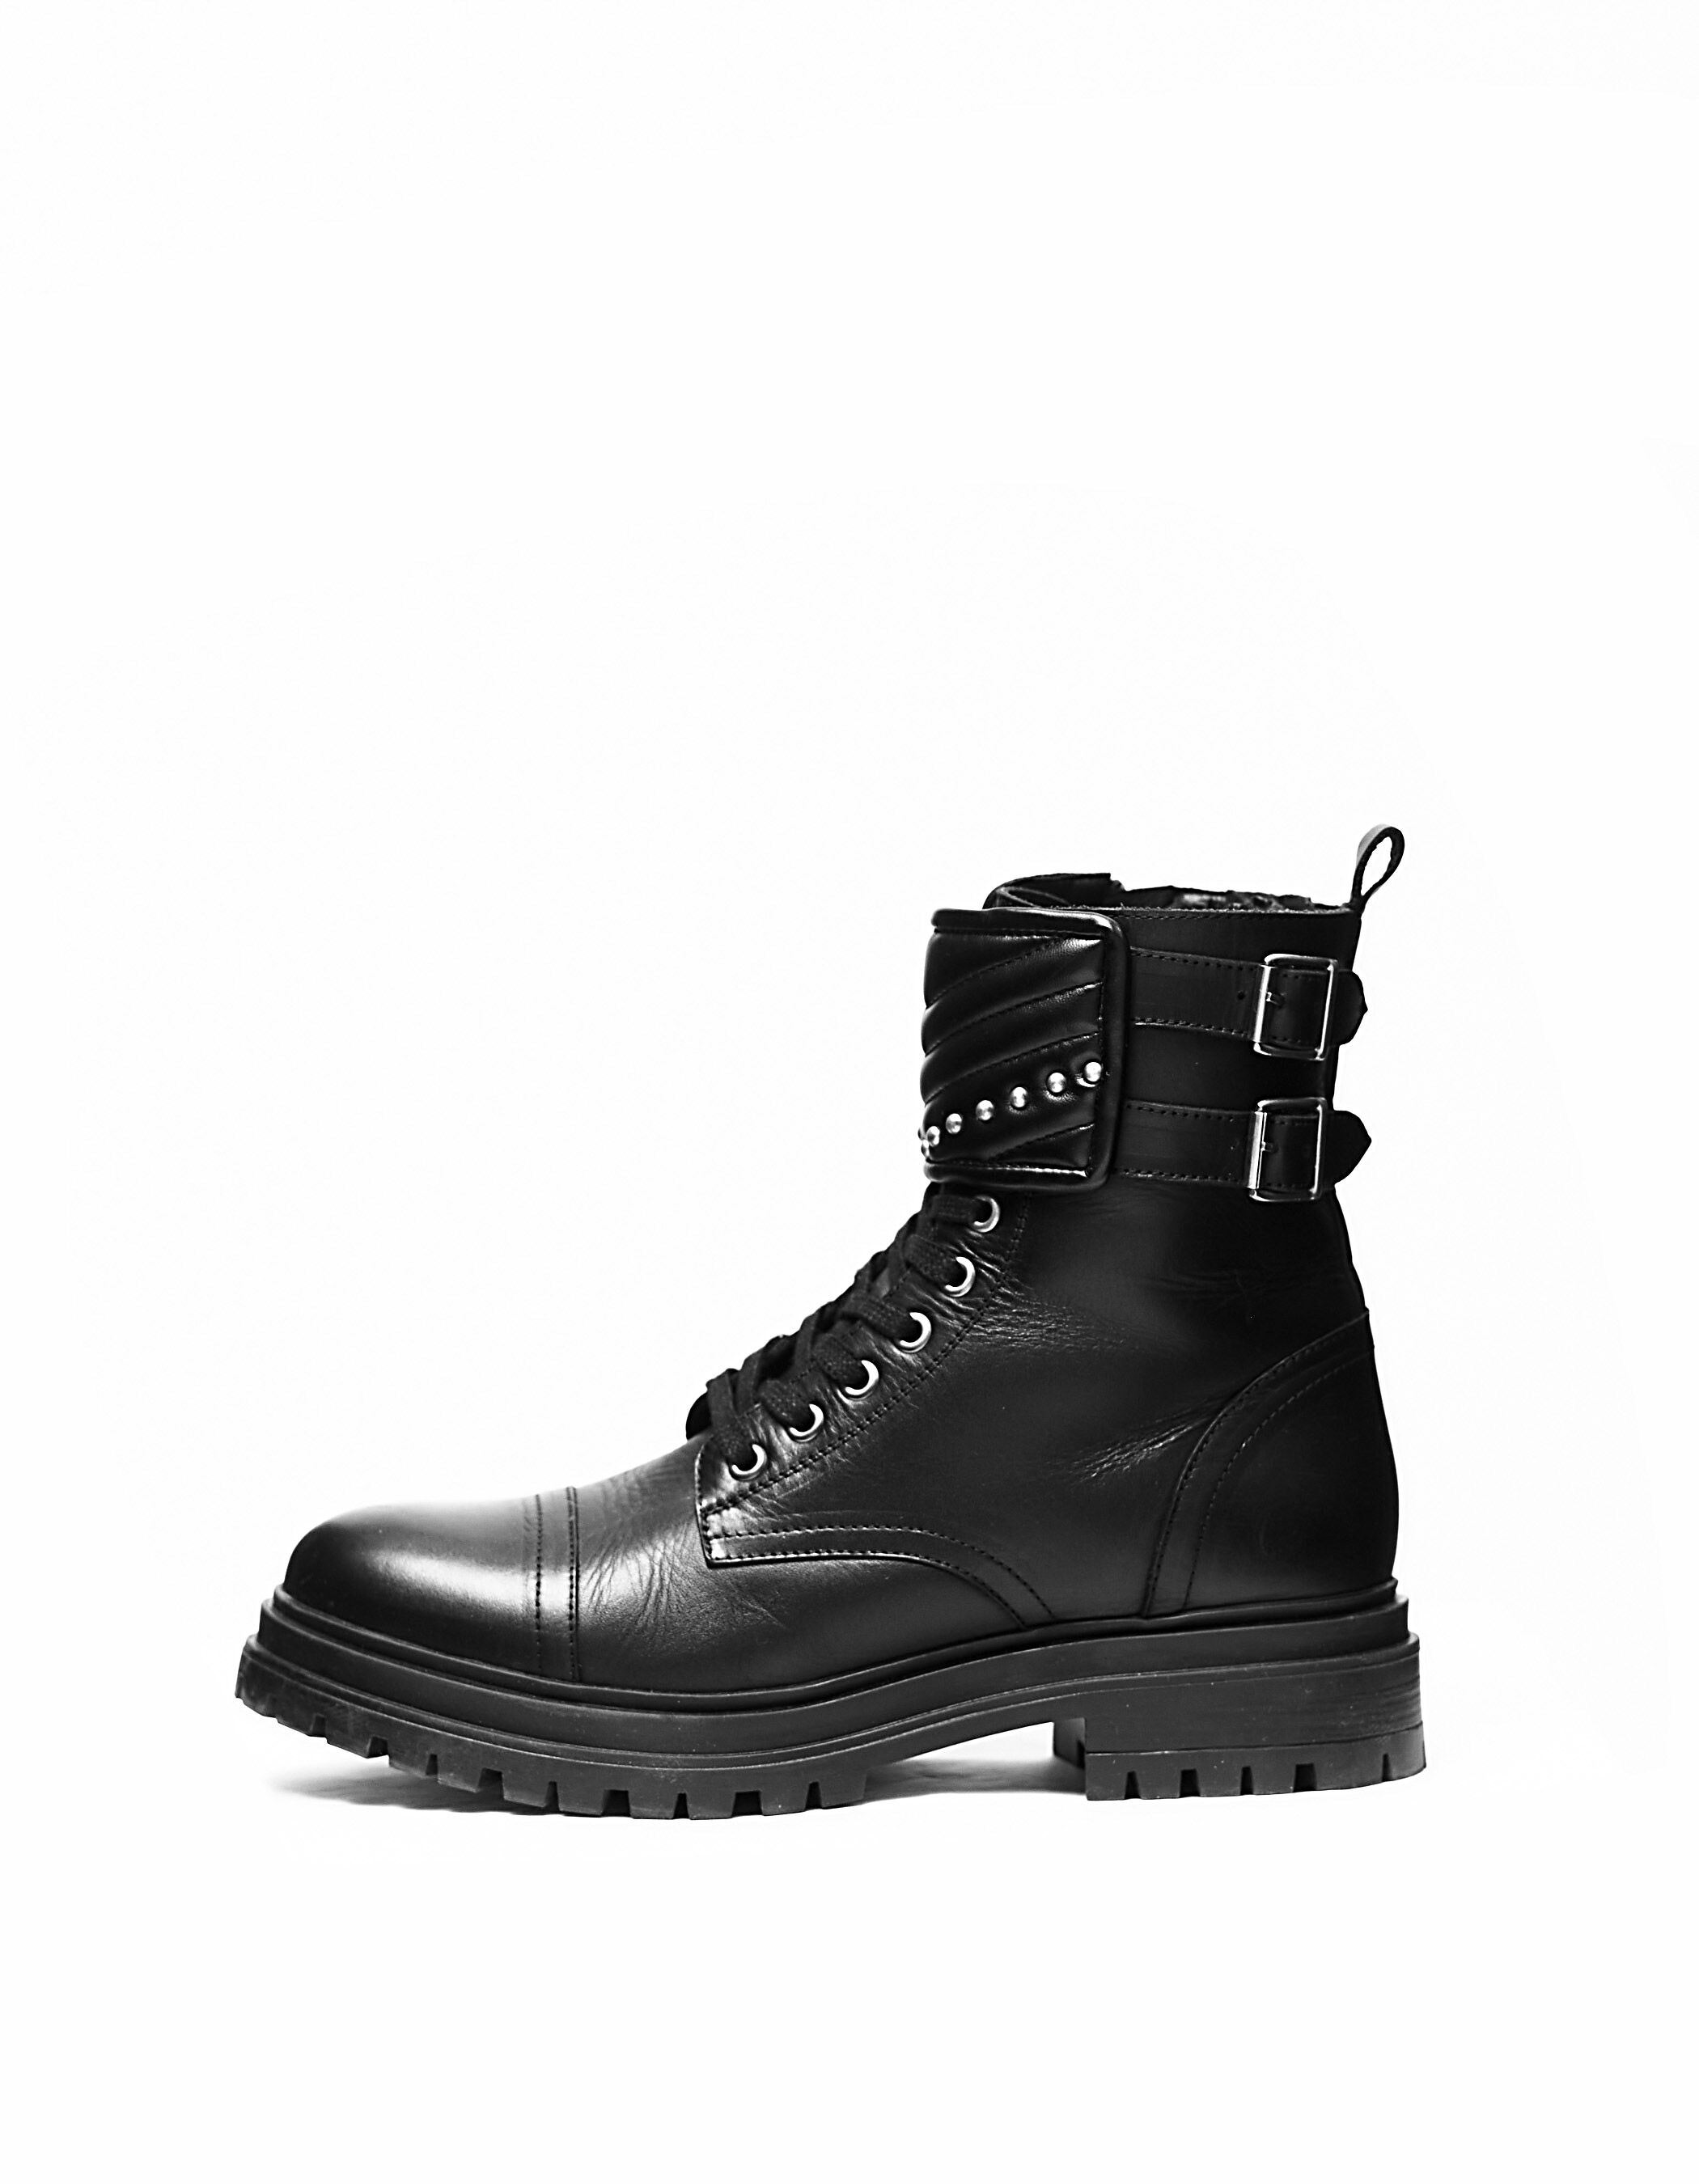 Leather story women's leather 1440 low combat boots